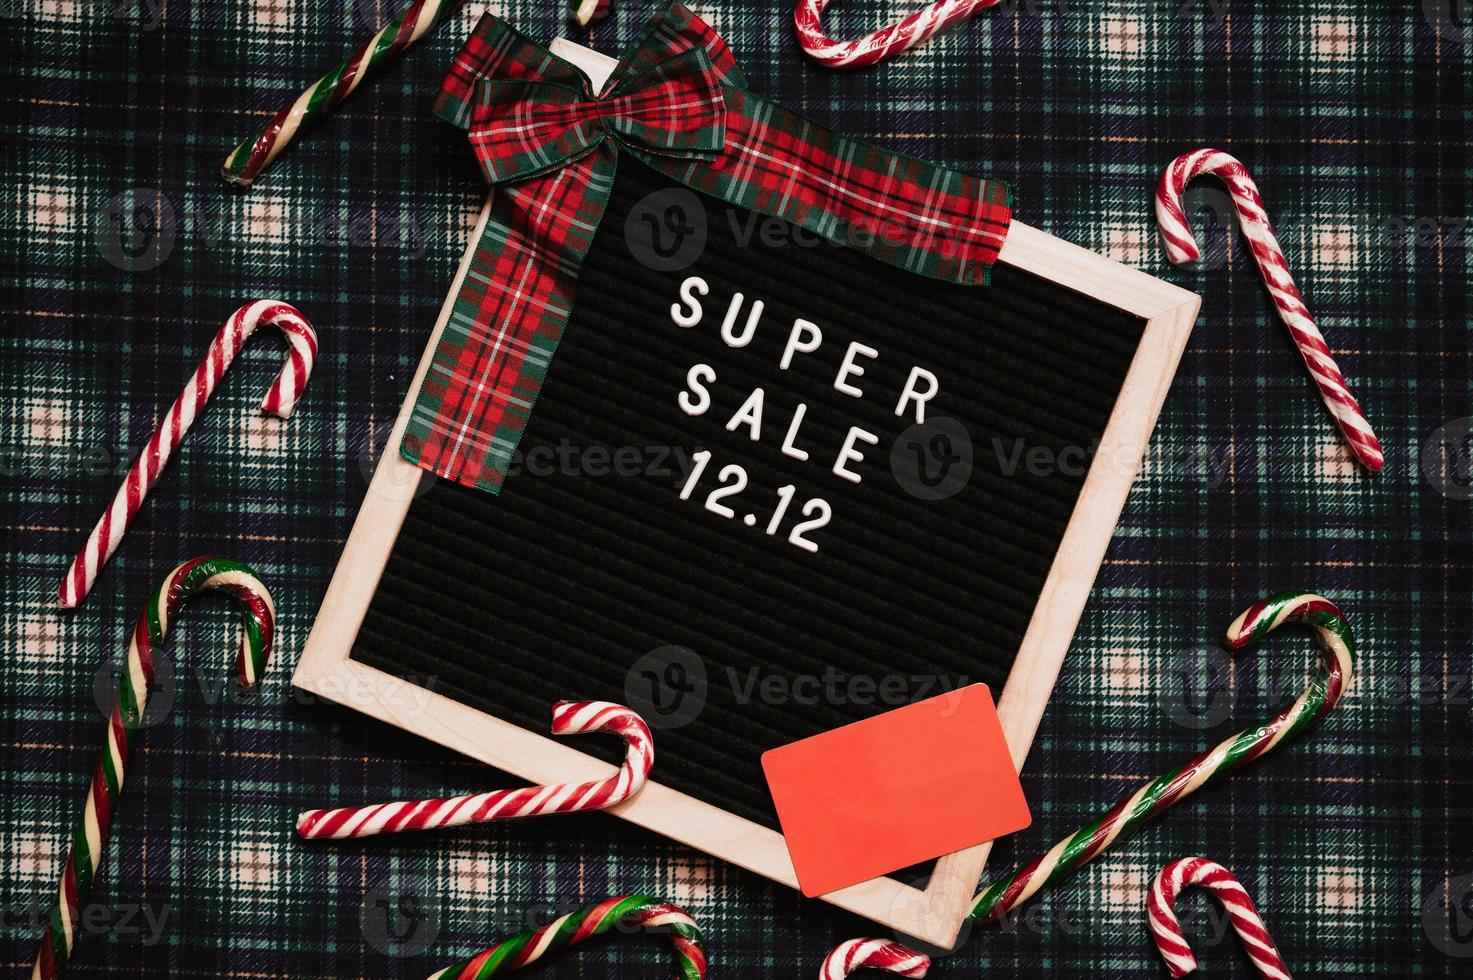 The text of the sale 12.12 on a letter board with a red gift box and Christmas candies, a credit card and a mini grocery cart. Design to promote the winter sale at the end of the year. Top view. photo